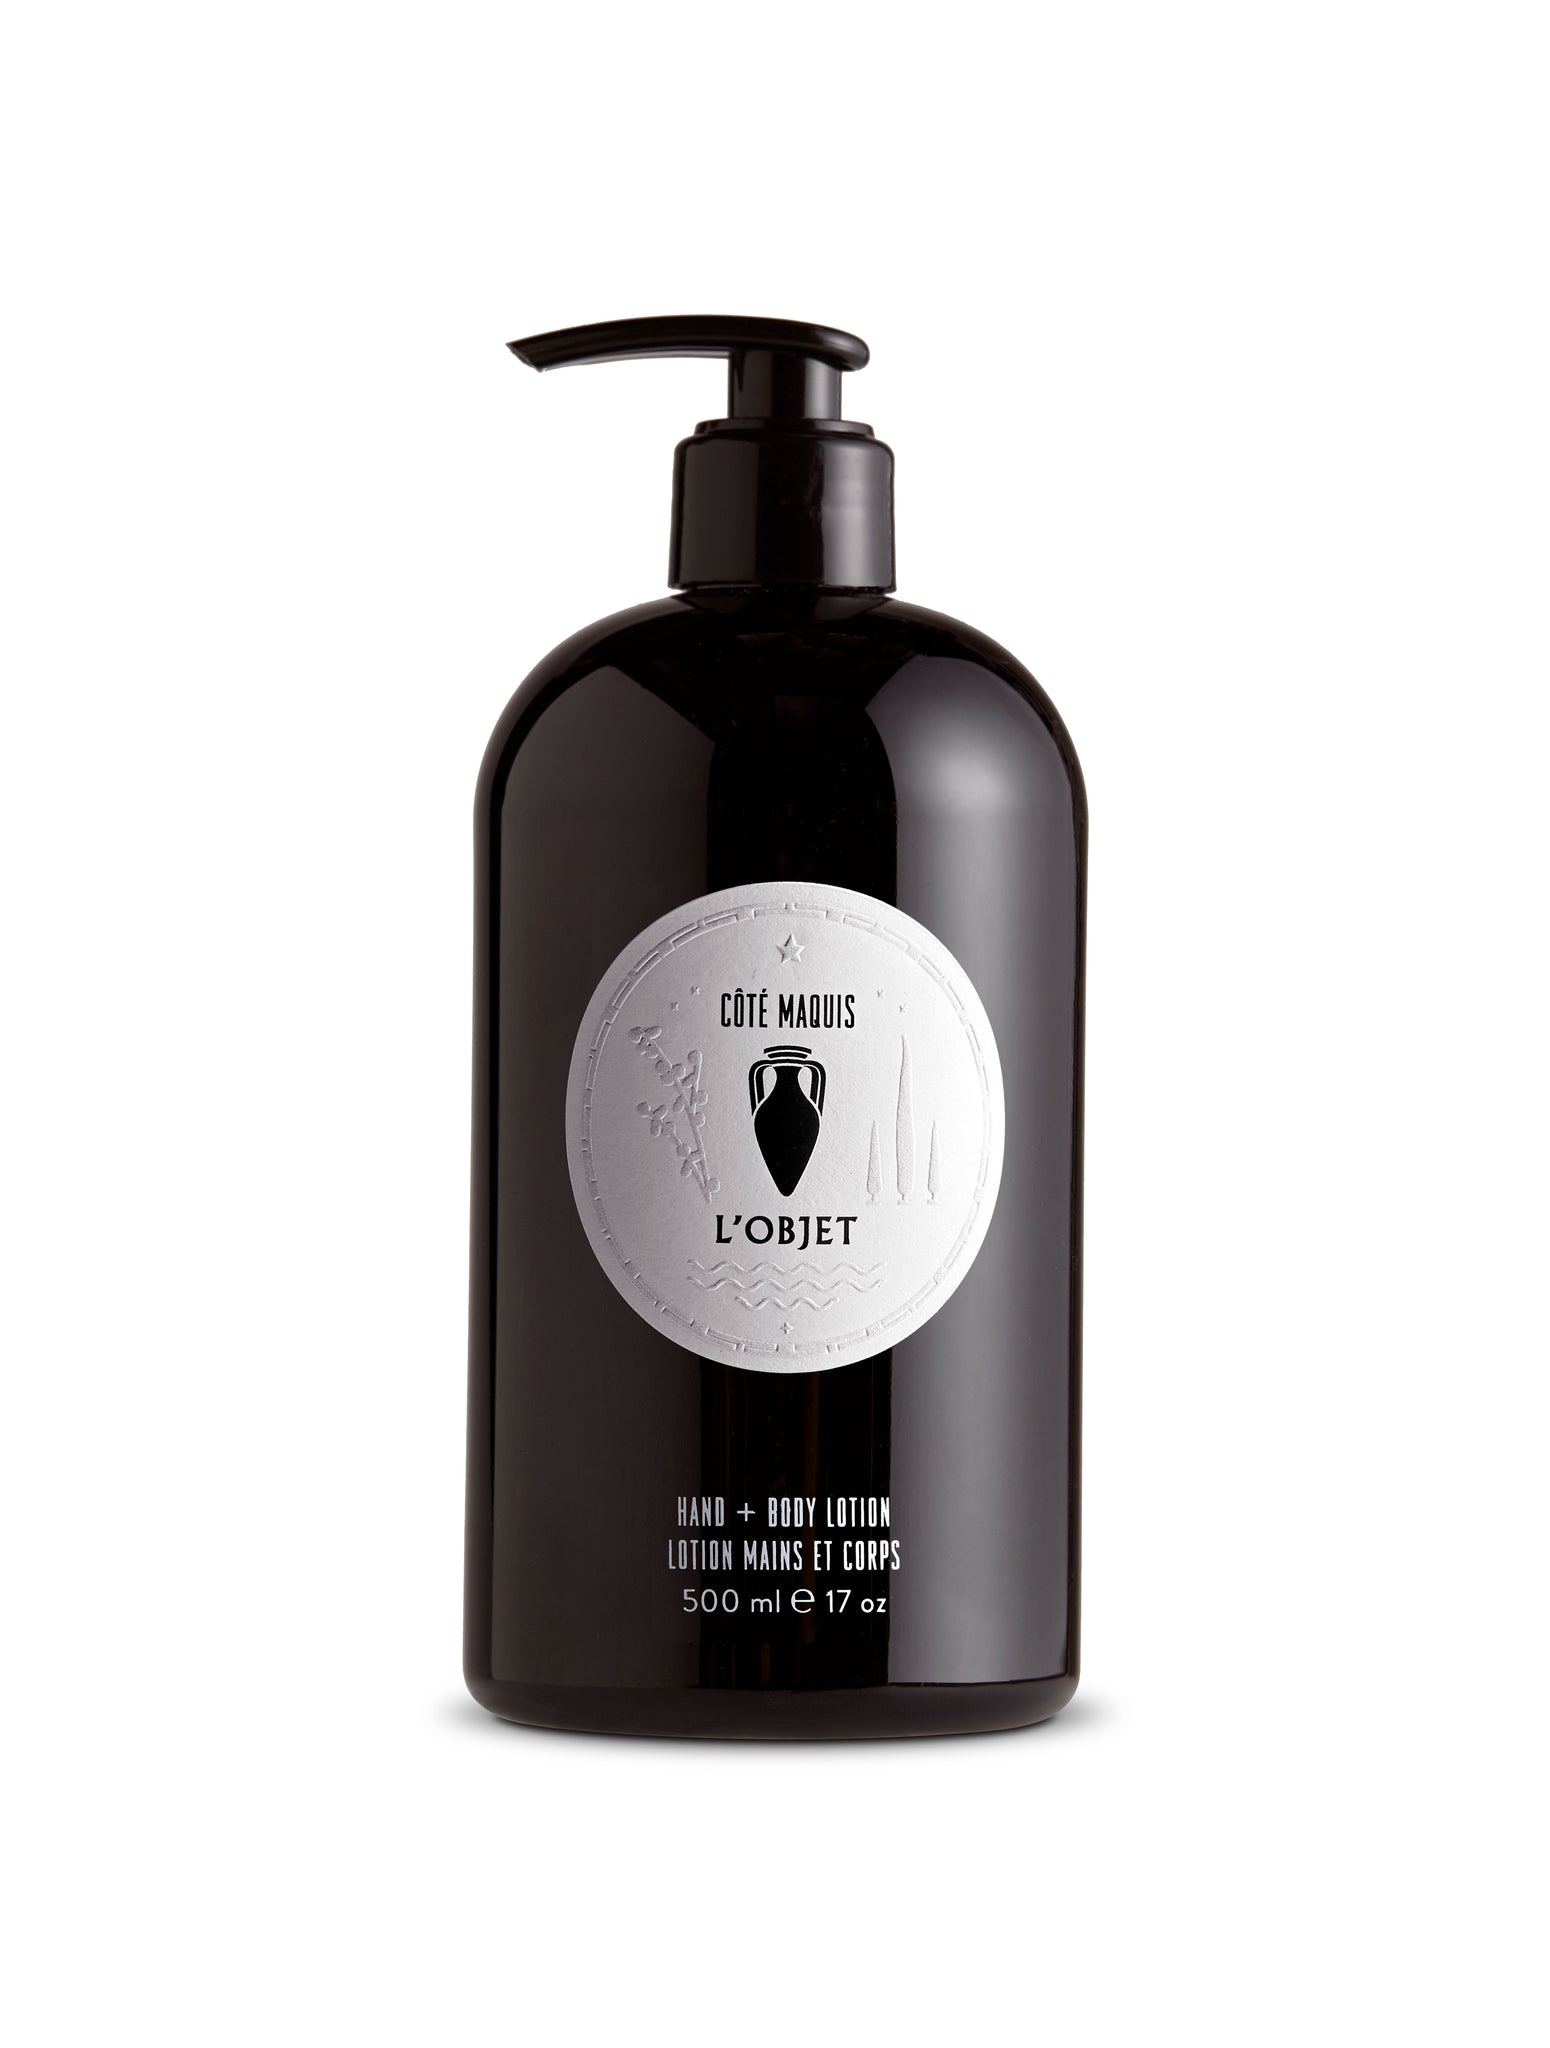 L'Object - Cote Maquis Hand + Body Lotion - 500ml